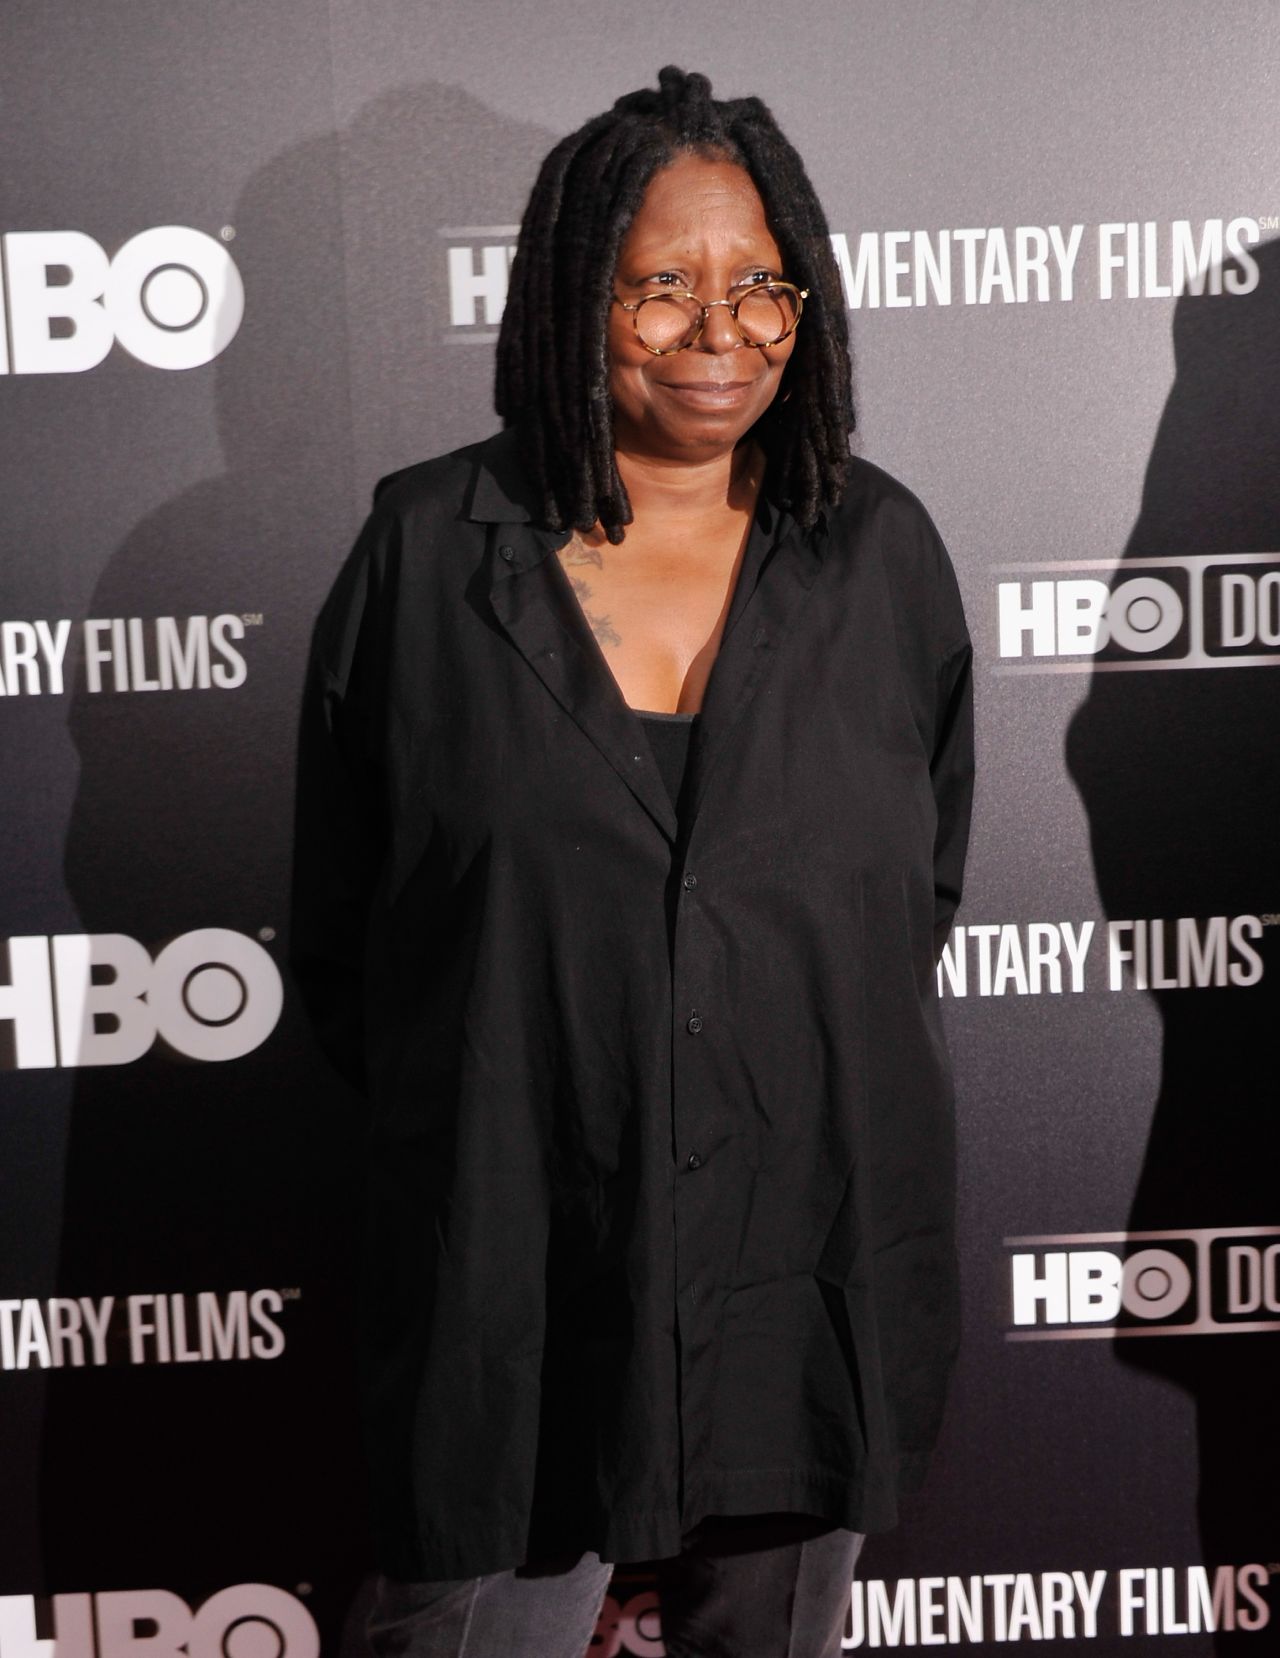 In 2007, Whoopi Goldberg became the show's new moderator. She mixed things up on the panel with her outspoken nature, including a <a href="http://www.theblaze.com/stories/2012/09/27/whoopi-goldberg-bleeped-during-heated-view-debate-with-ann-coulter-if-youre-gonna-talk-about-race-know-what-youre-talking-about/" target="_blank" target="_blank">heated debate with conservative pundit Ann Coulter</a> and her <a href="http://www.theroot.com/blogs/the_grapevine/2014/07/whoopi_goldberg_defends_stephen_a_smith_if_you_hit_a_man_don_t_be_surprised.html" target="_blank" target="_blank">defense of ESPN anchor Stephen A. Smith.</a> She has continued to act, including a performance in the 2014 reboot "Teenage Mutant Ninja Turtles." 